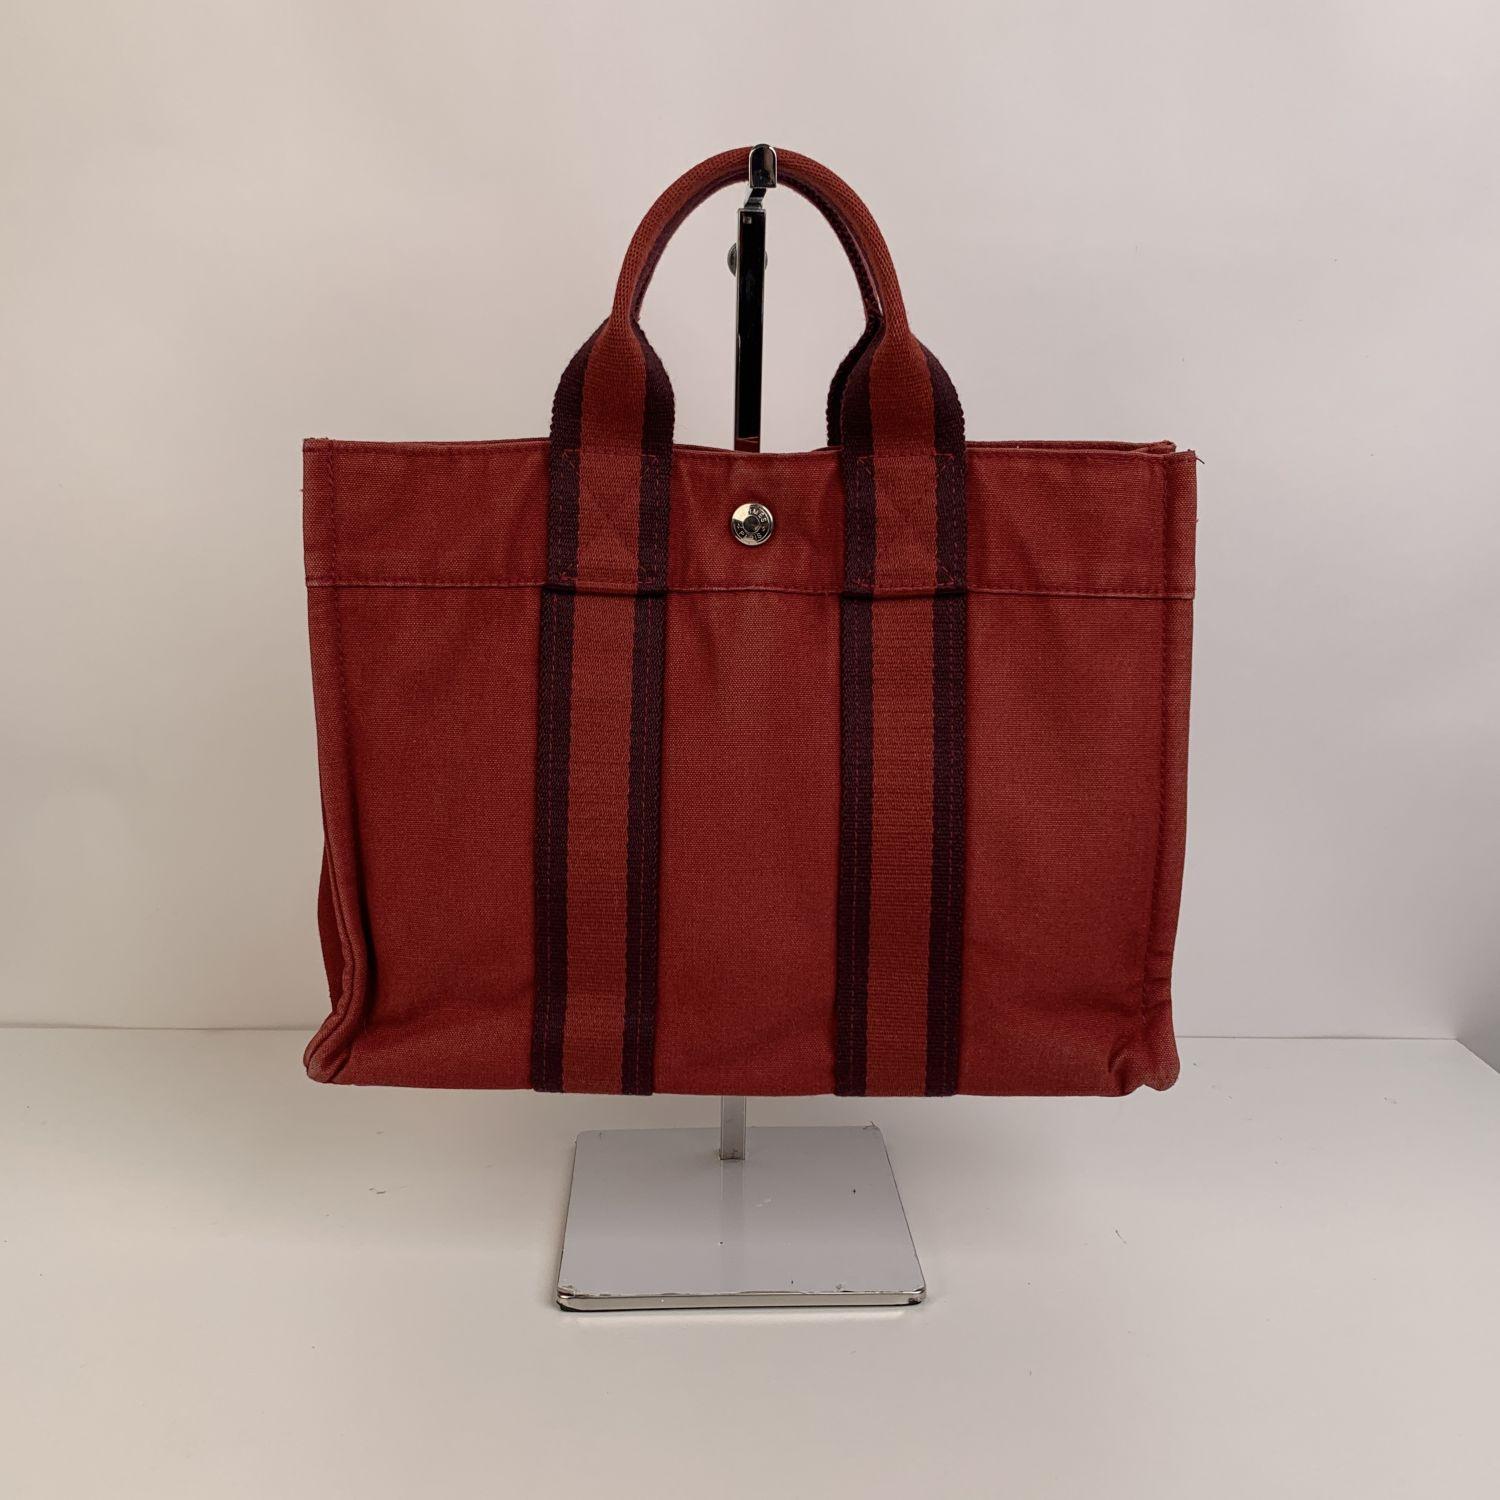 - Model: 'HERMES FOURRE TOUT - PM' Tote handbag
- Made in France
- Color: red
- Material: 100% cotton
- It has snaps on both ends for expansion
- Durable canvas handles, perfect for casual and everyday use.
- Open top with middle snap closure